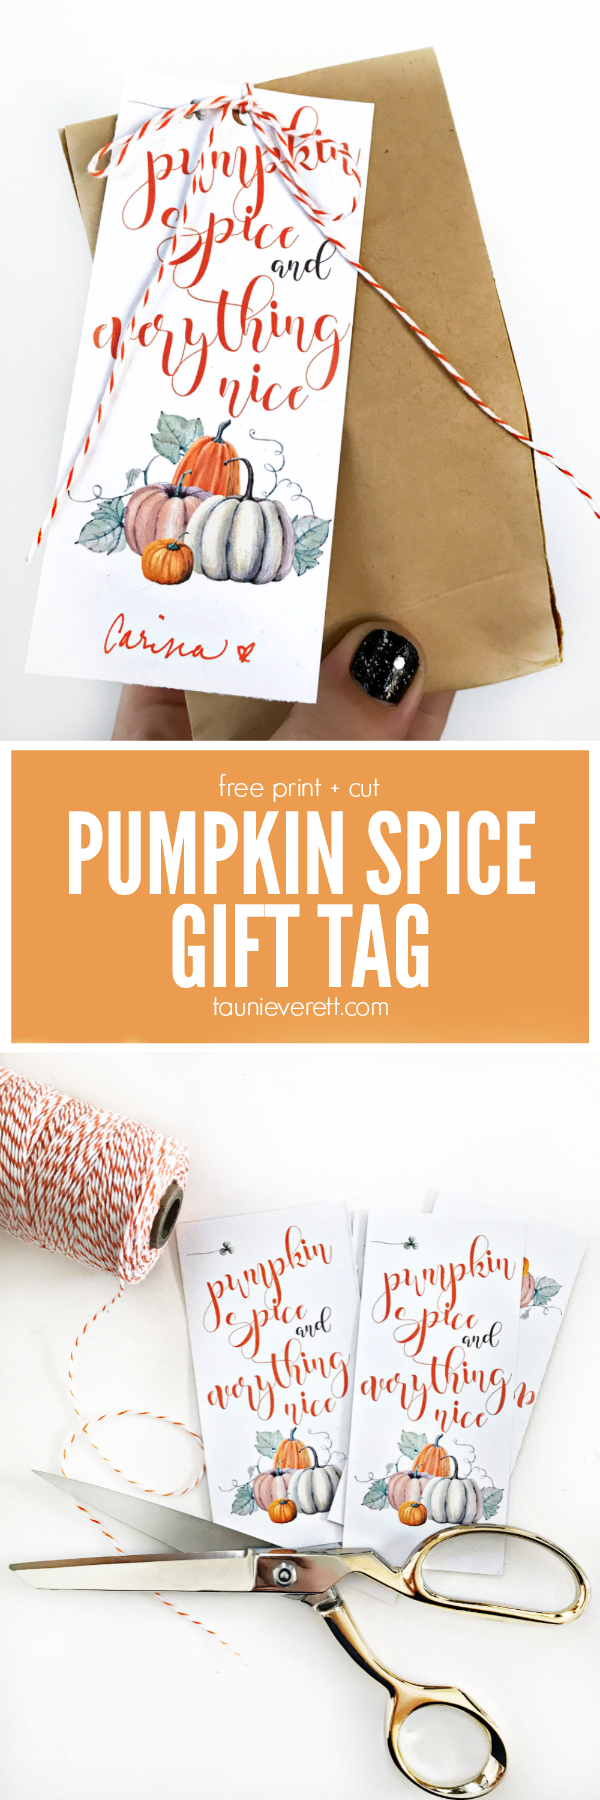 Pumpkin Spice And Everything Nice Gift Tag | Print - Turkey Day - Free Printable Pumpkin Gift Tags